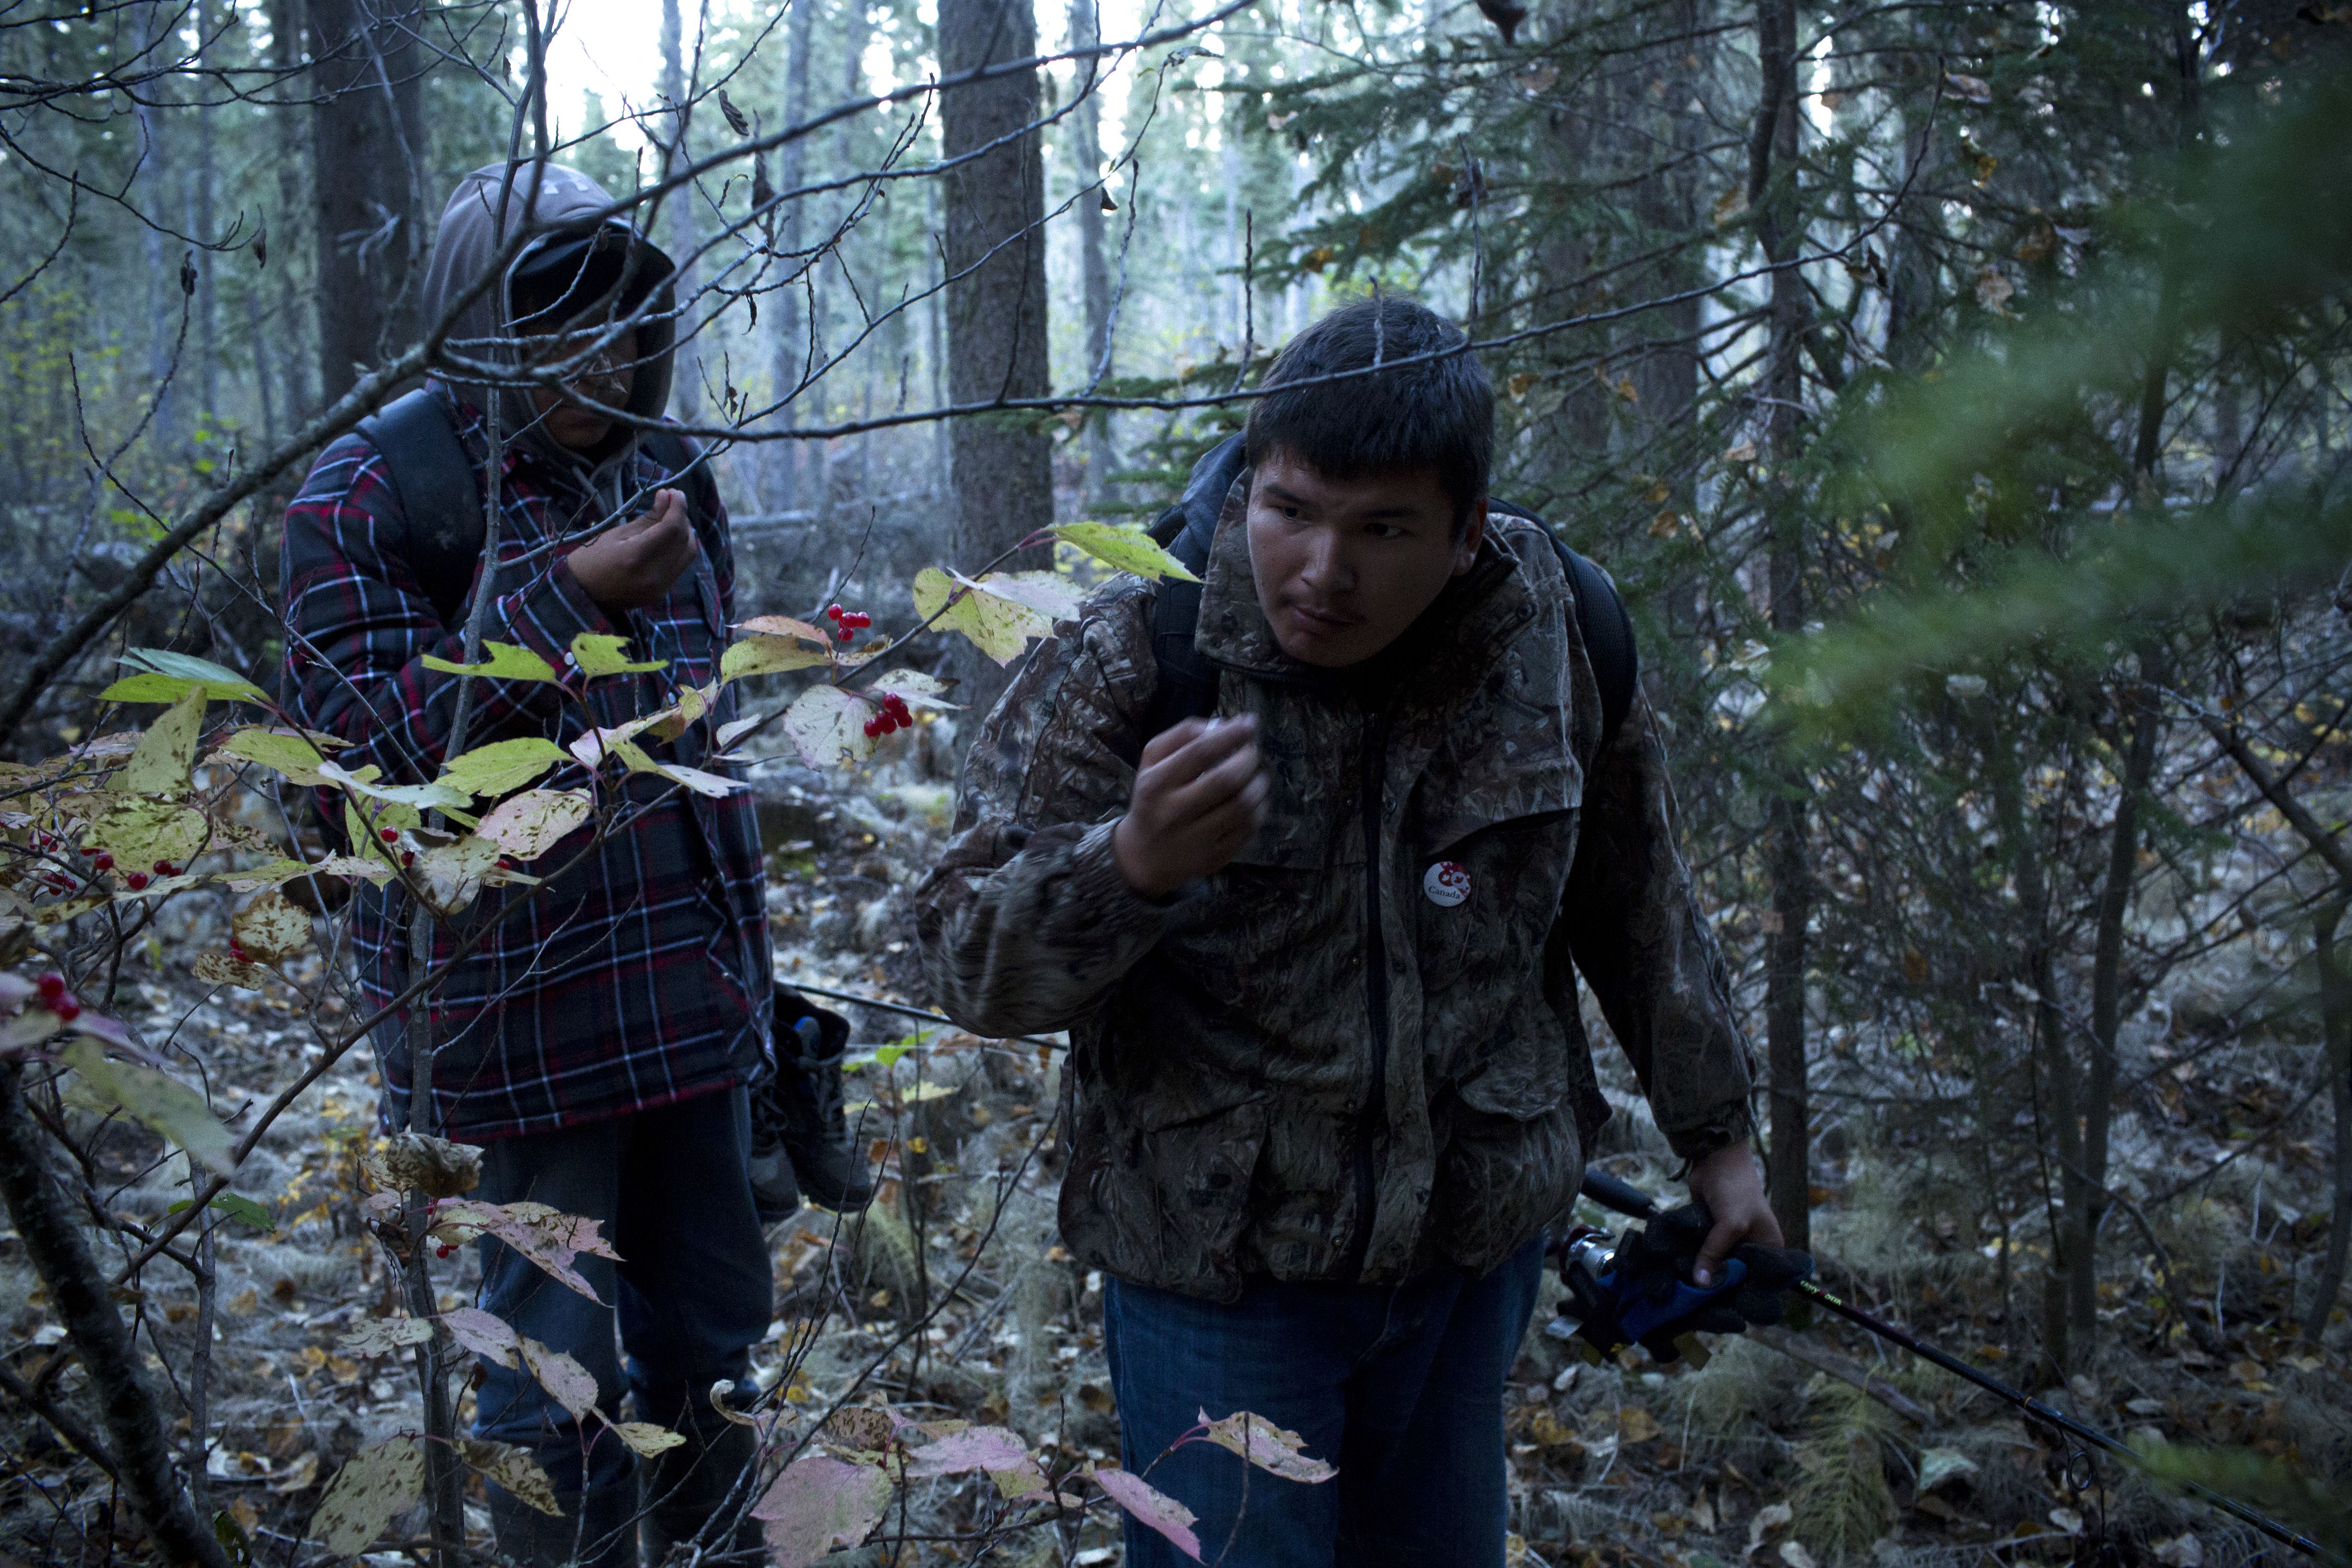 Lucas Shisheesh (right, 21 years old) and Adrian Hookimaw (19) pick wild berries while hiking from a fishing spot on the banks of the Attawapiskat river. Like many other young people I met in Attawapiskat, Lucas spends a great deal of time on the land after being taught by his father how to navigate the wilderness. Image by David Maurice Smith. Canada, 2016.